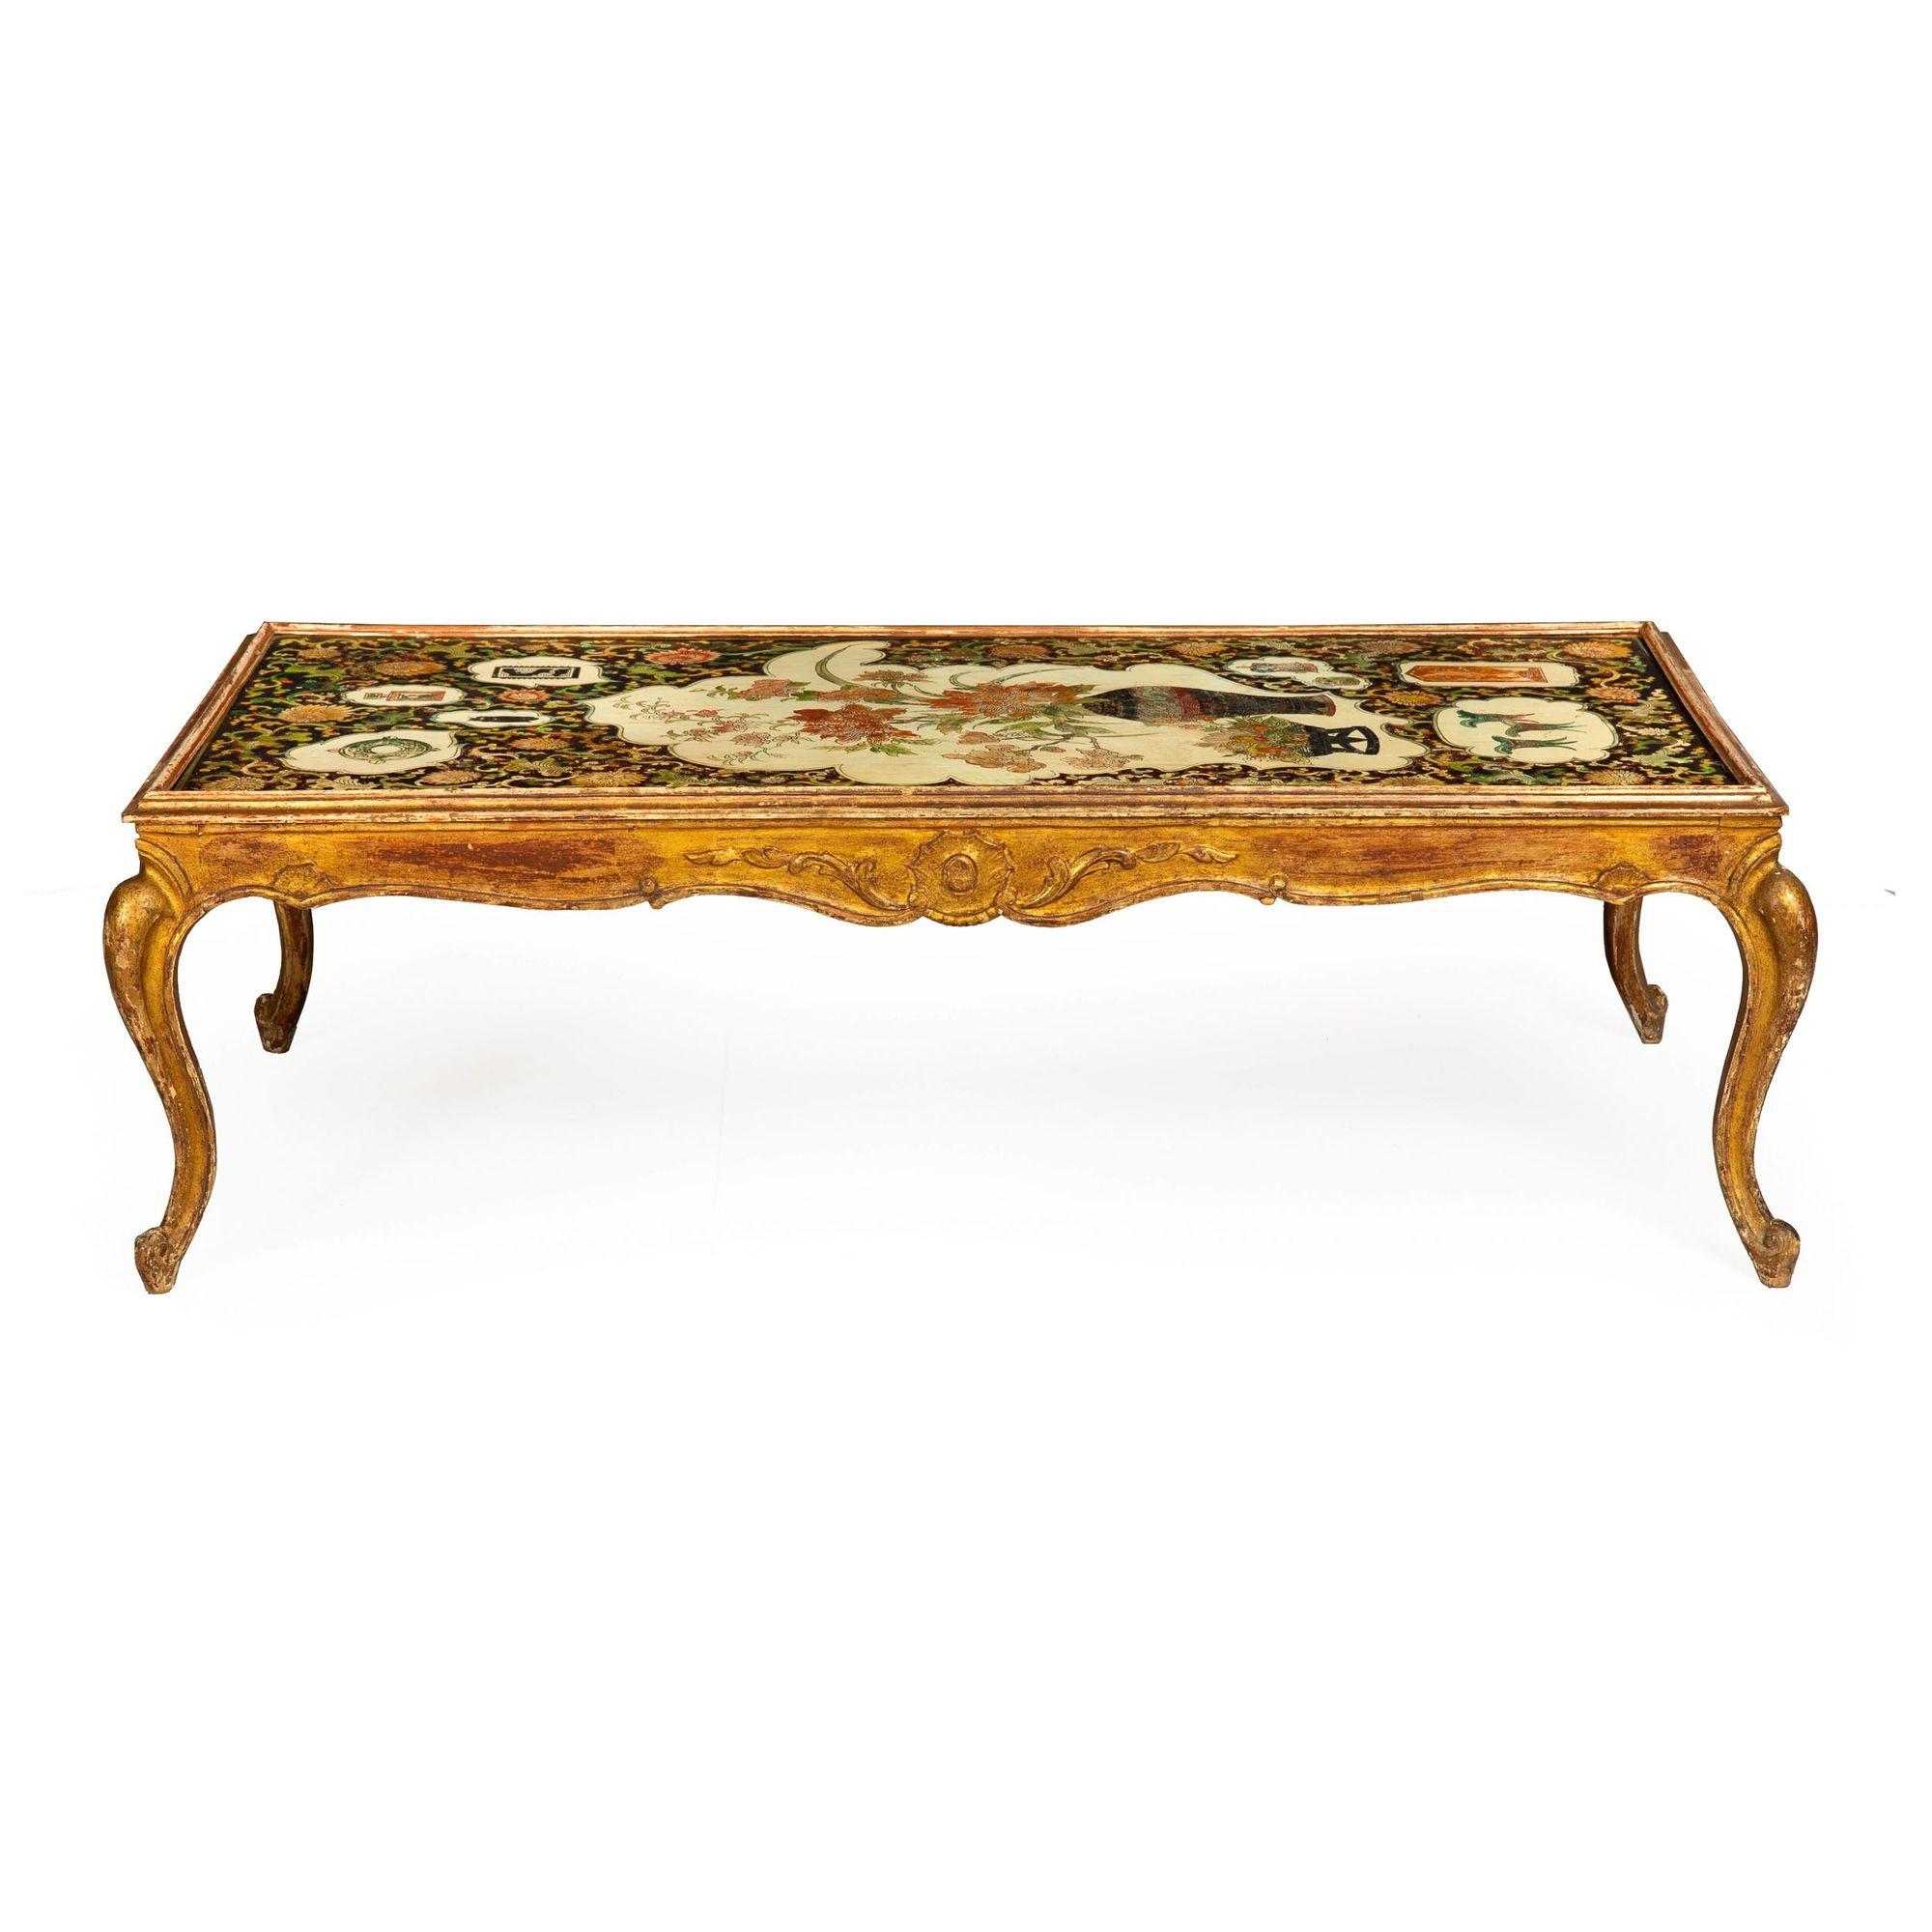 HOLLYWOOD REGENCY GILTWOOD LOW TABLE WITH INCISED POLYCHROME PAINTED TOP
Circa 1940s
Item # 403LVB18M

An exuberant design from the Hollywood Regency era, this fine low coffee table showcases a perfect blend of a subdued elegance and personality.